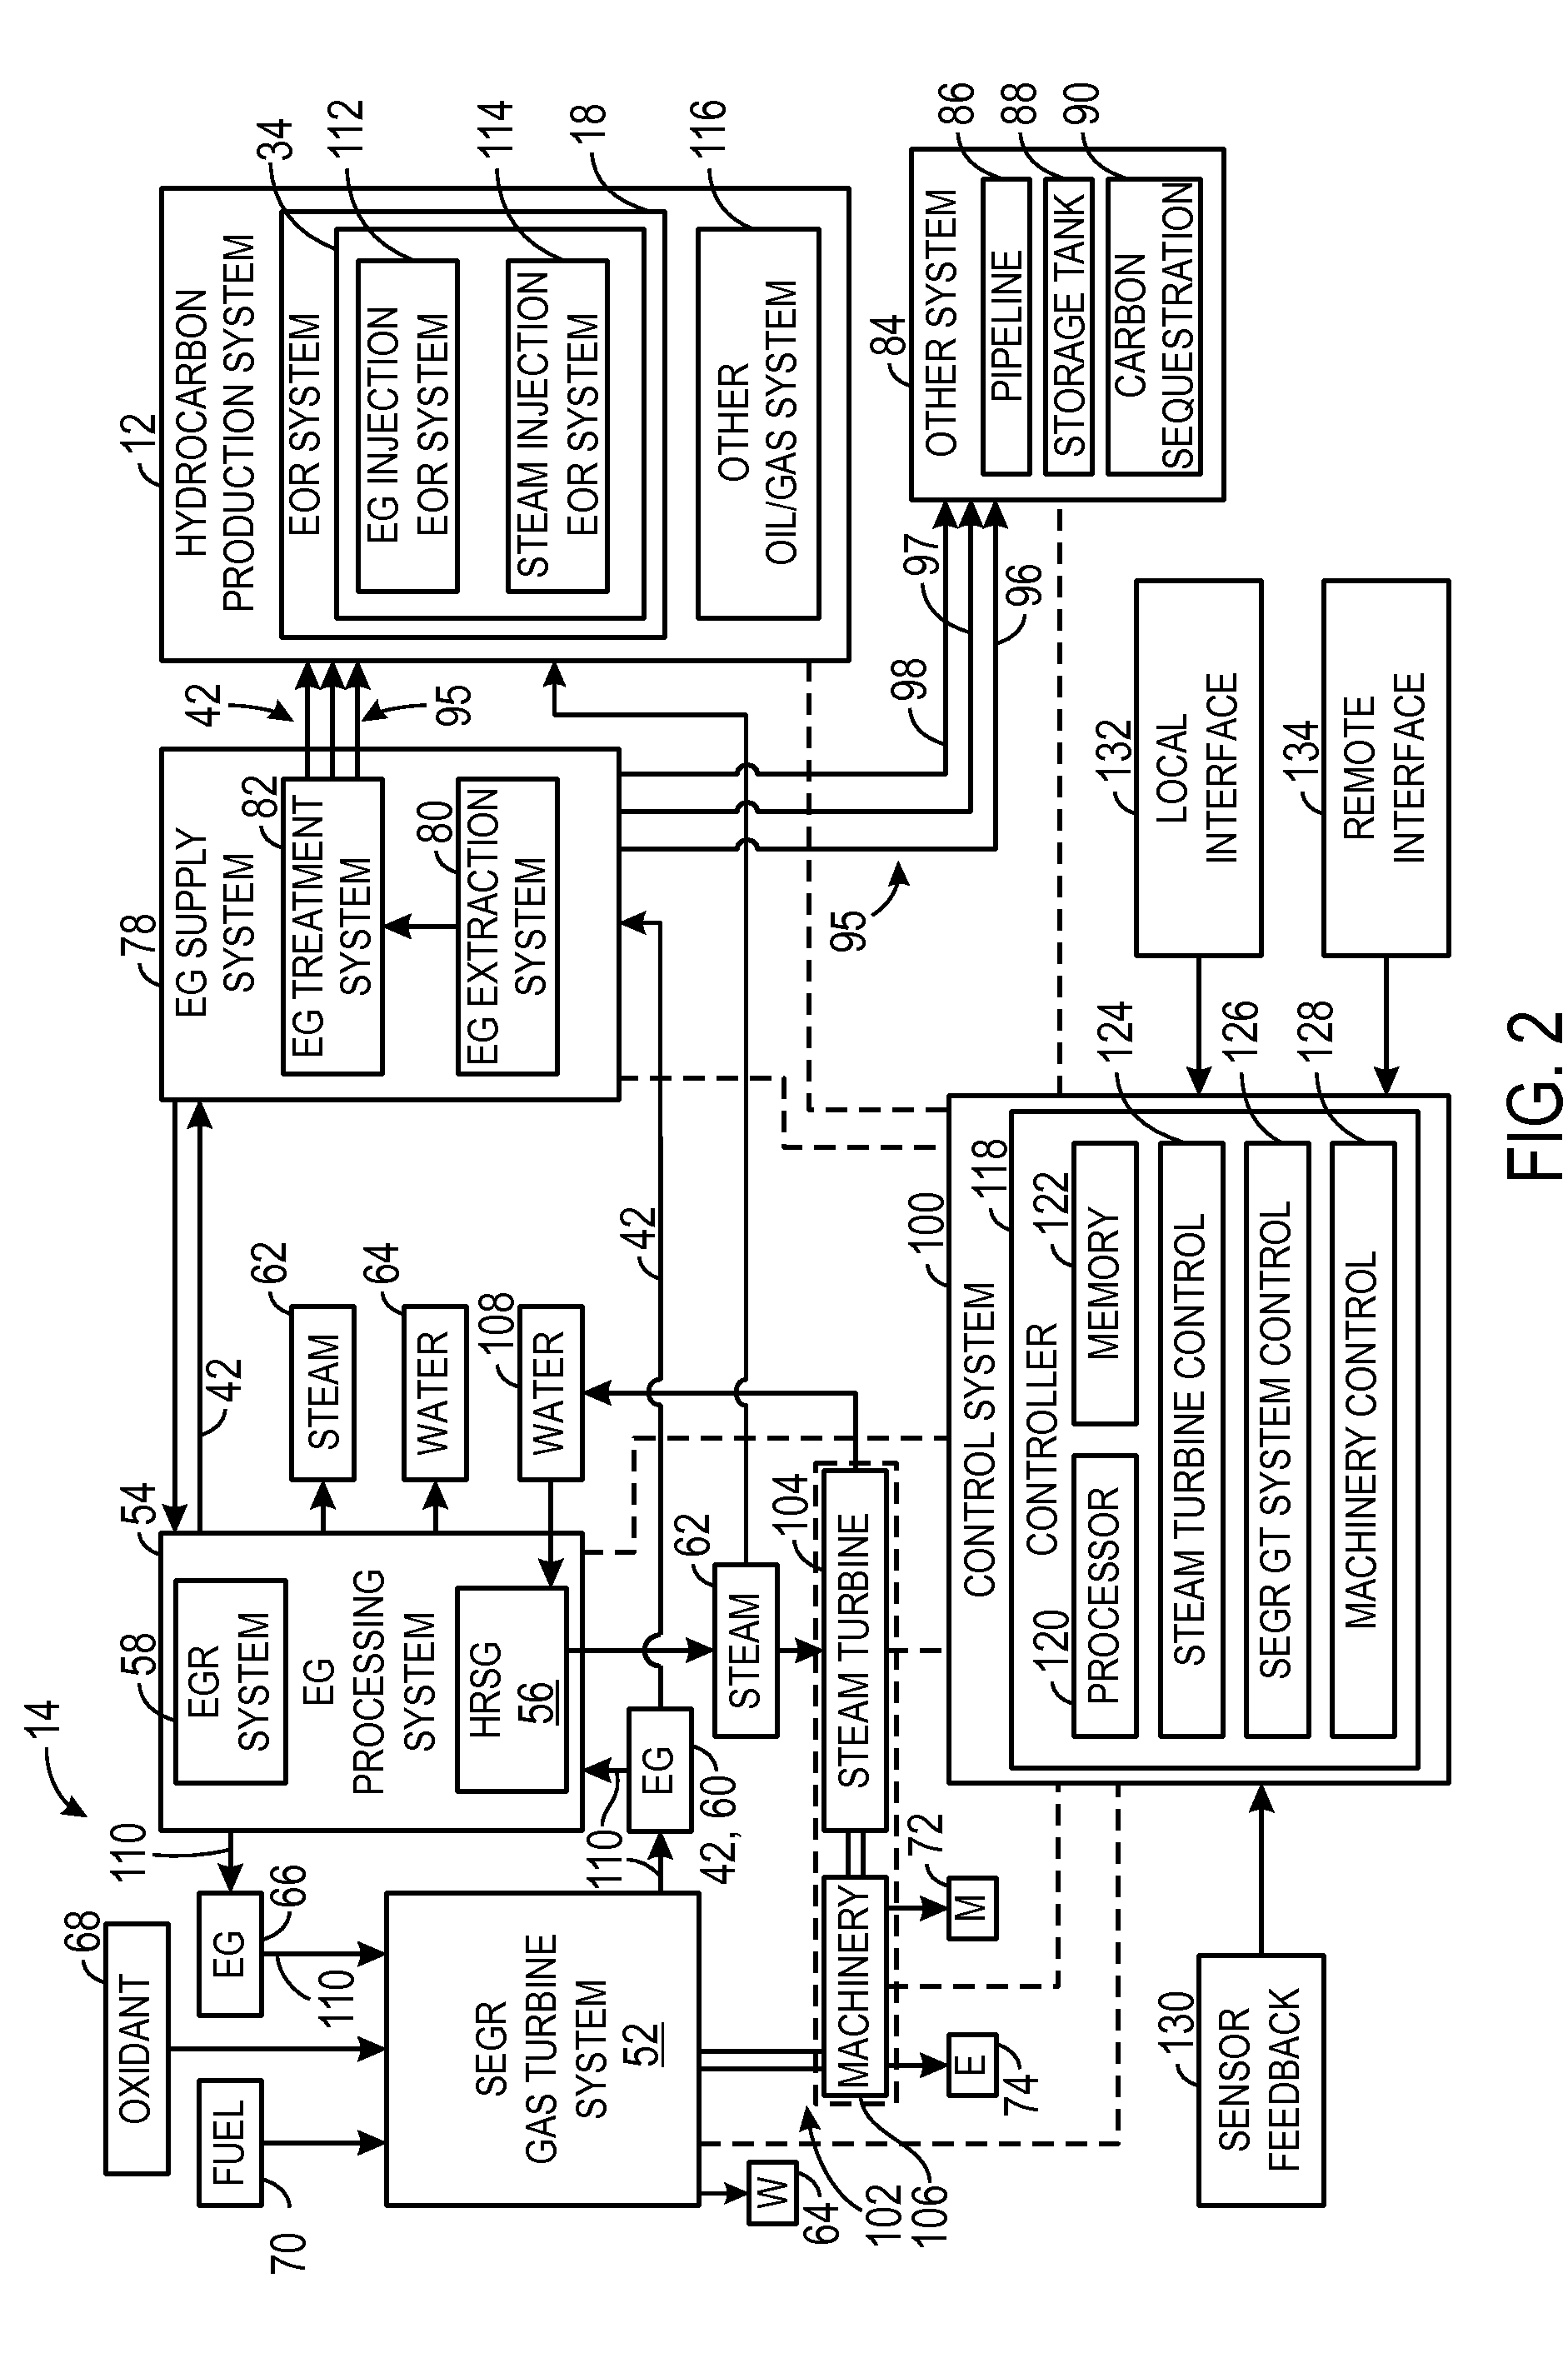 System and method for diffusion combustion with oxidant-diluent mixing in a stoichiometric exhaust gas recirculation gas turbine system